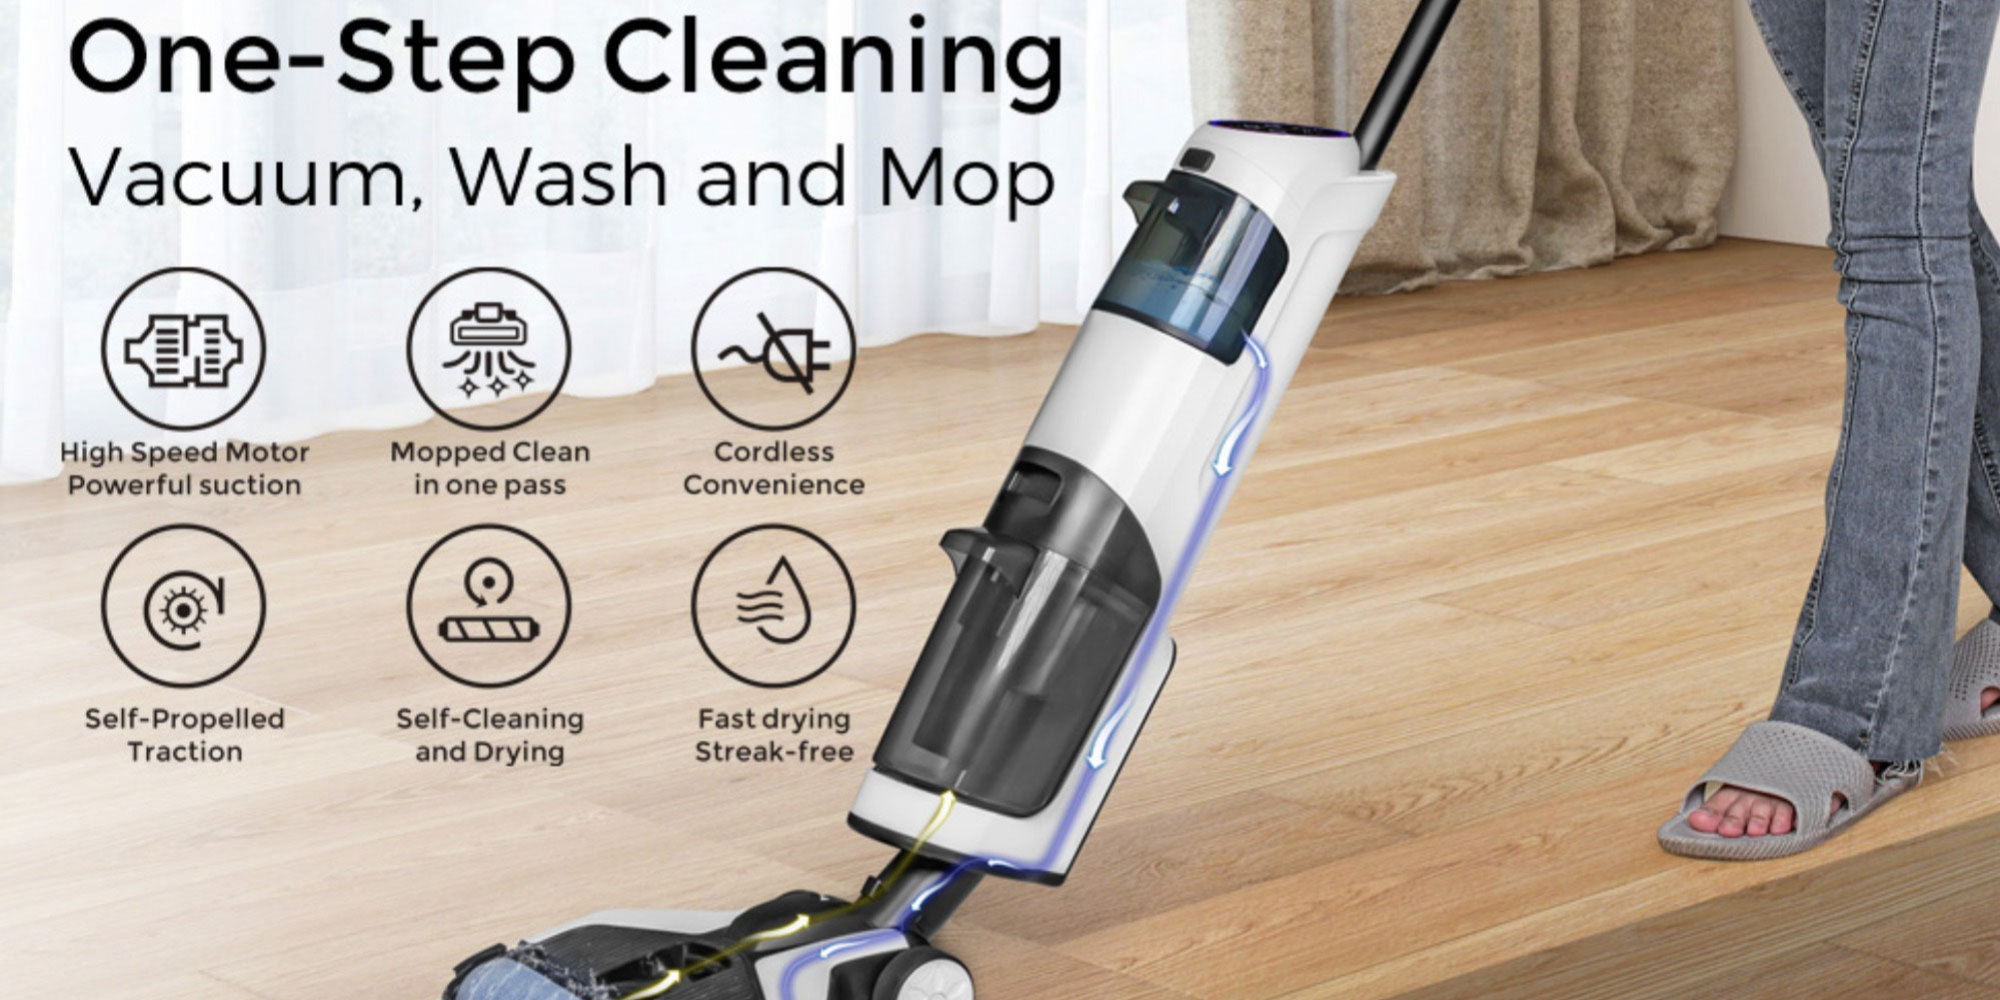 Sonicgrace K9 Cordless Wet Dry Vacuum and Mop Leaves Your Home Spotless!